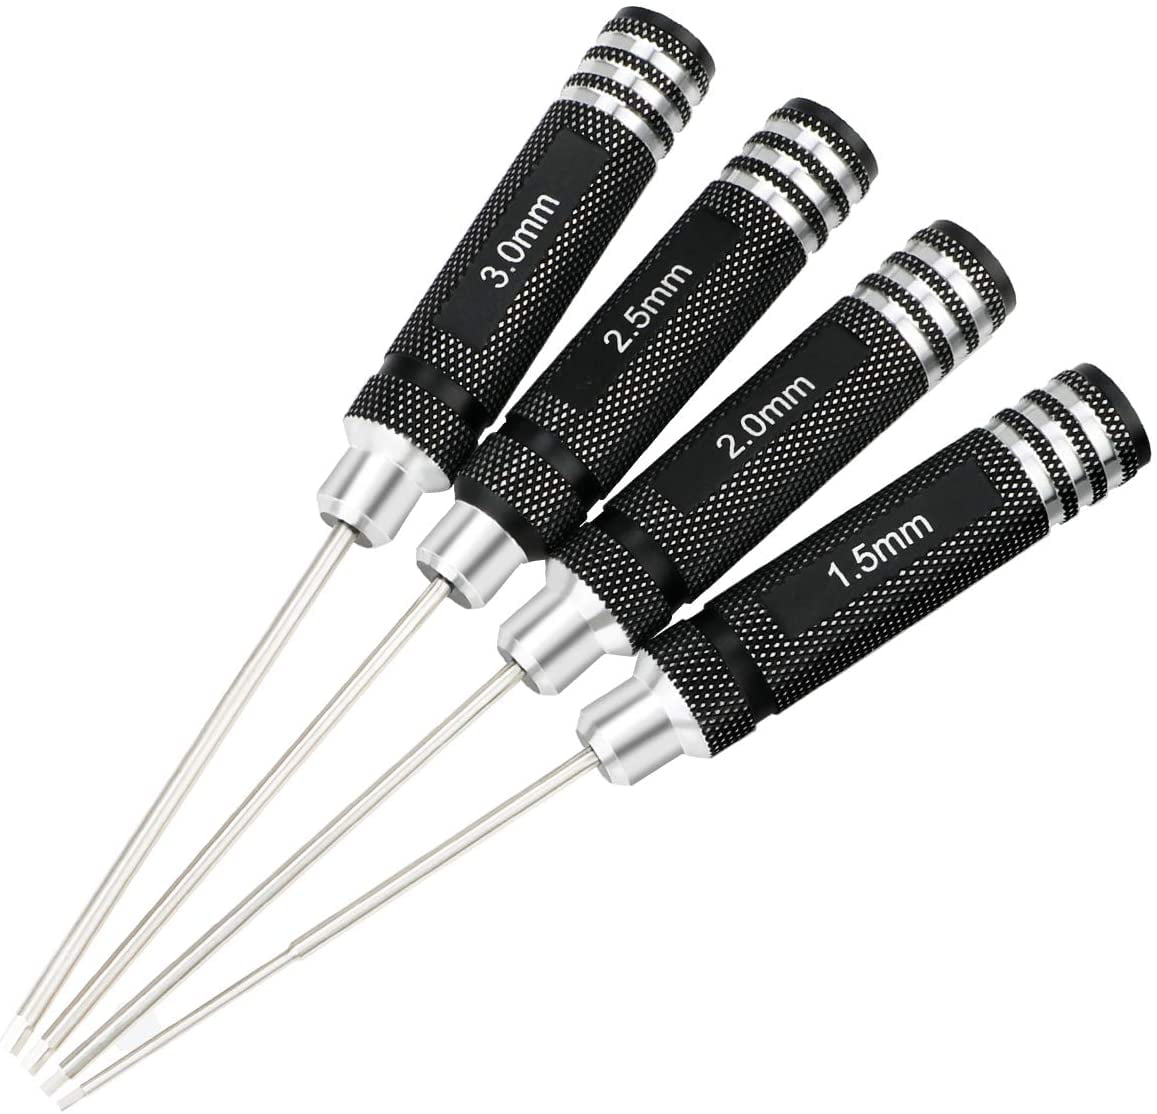 4x Hex Screwdriver Repair Tool Set For RC Car Drone Helicopter 1.5/2.0/2.5/3.0mm